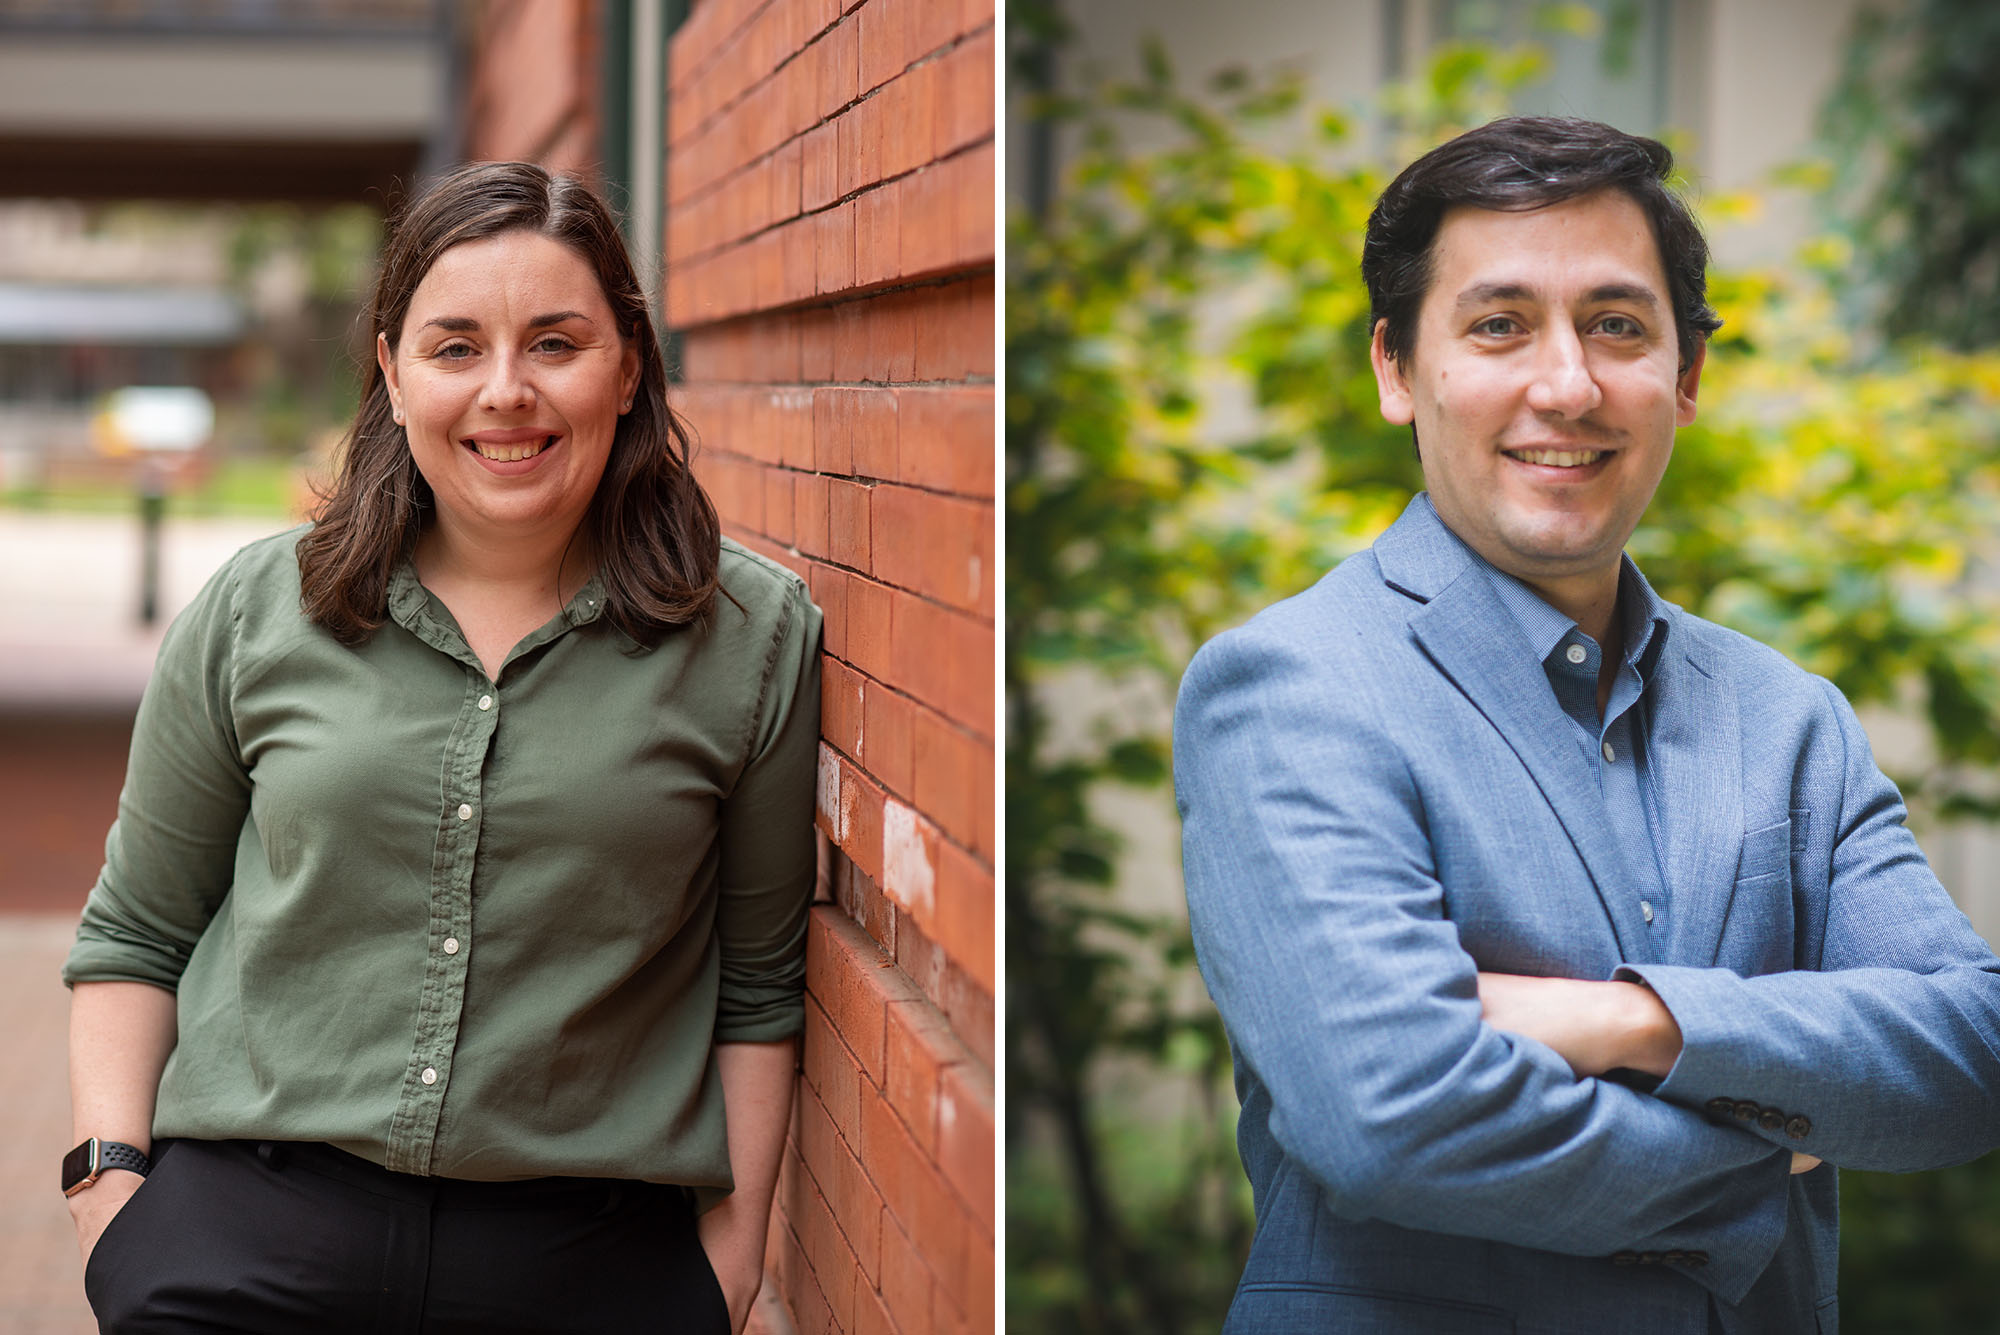 NIH Honors Two BU Researchers “Poised to Blaze New Paths of Discovery” The Brink Boston University